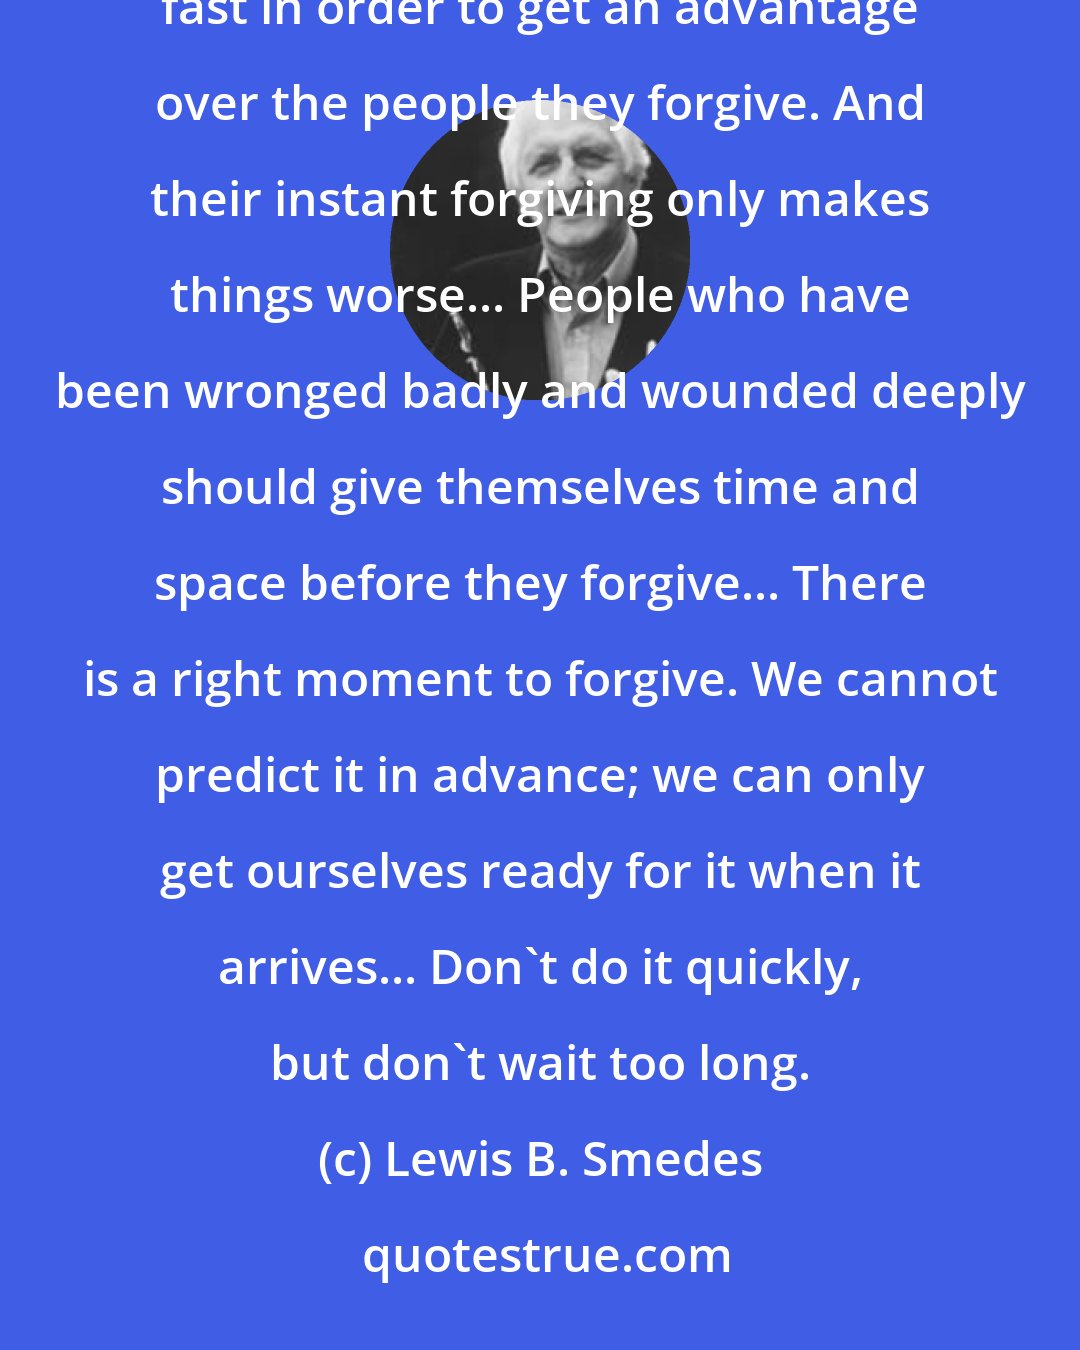 Lewis B. Smedes: I worry about fast forgivers. They tend to forgive quickly in order to avoid their pain. Or they forgive fast in order to get an advantage over the people they forgive. And their instant forgiving only makes things worse... People who have been wronged badly and wounded deeply should give themselves time and space before they forgive... There is a right moment to forgive. We cannot predict it in advance; we can only get ourselves ready for it when it arrives... Don't do it quickly, but don't wait too long.